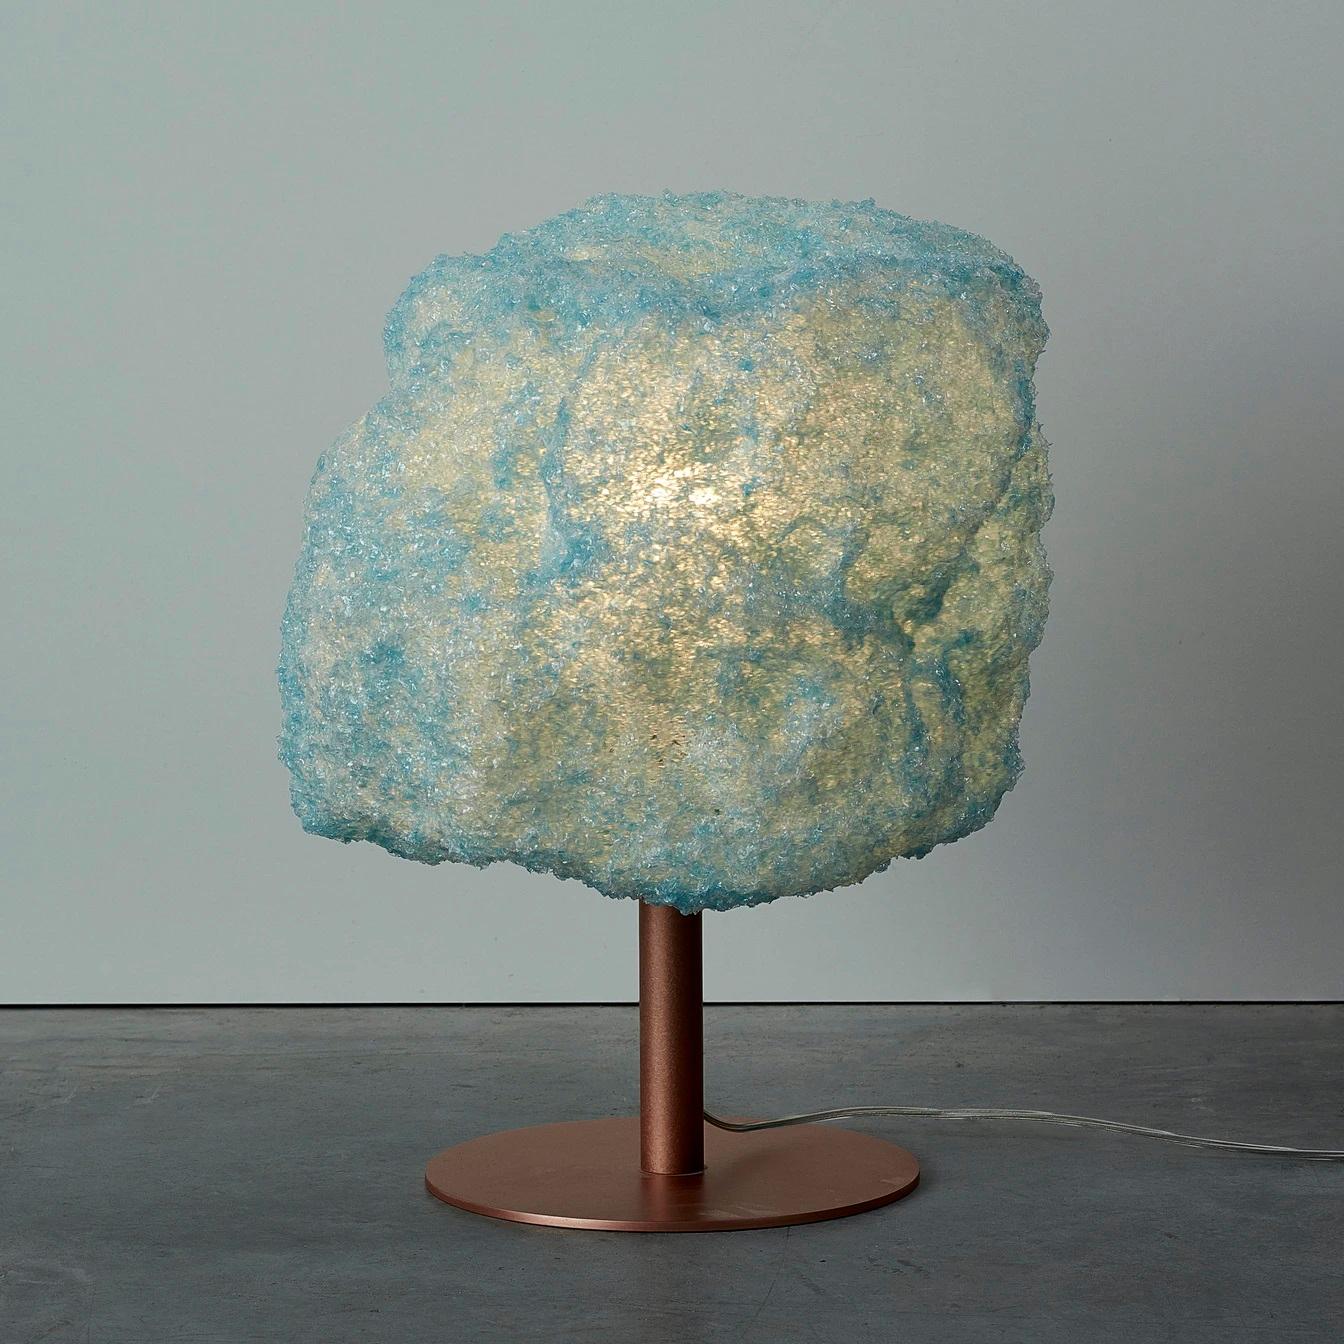 Blue storm table light copper by Johannes Hemann
Material: Polycarbonate, walnut
Dimensions: Ø 38 x H 45 cm

The Storm Series is by its concept the purest example of a process-design, where the designer seeks to set creative parameters to allow